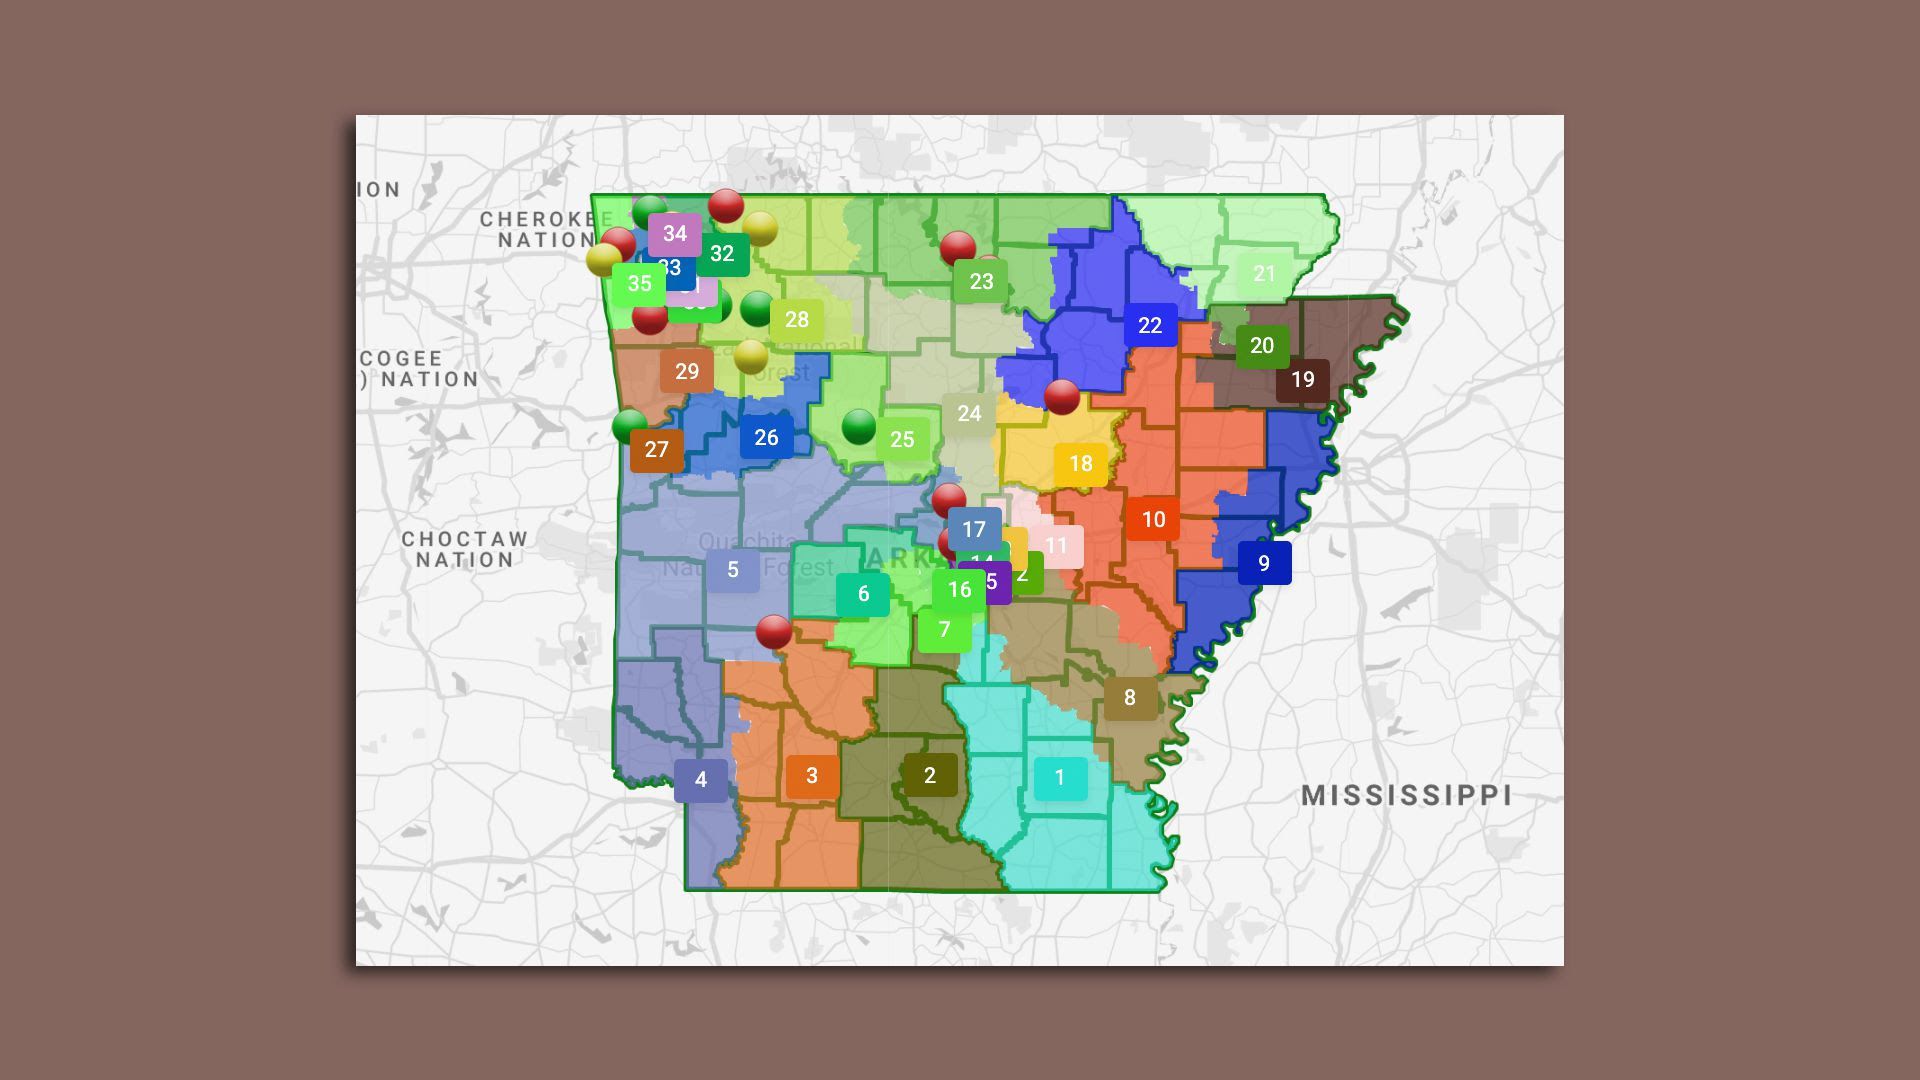 The approved Arkansas state redistricting map being challenged by the ACLU. Courtesy of the State of Arkansas